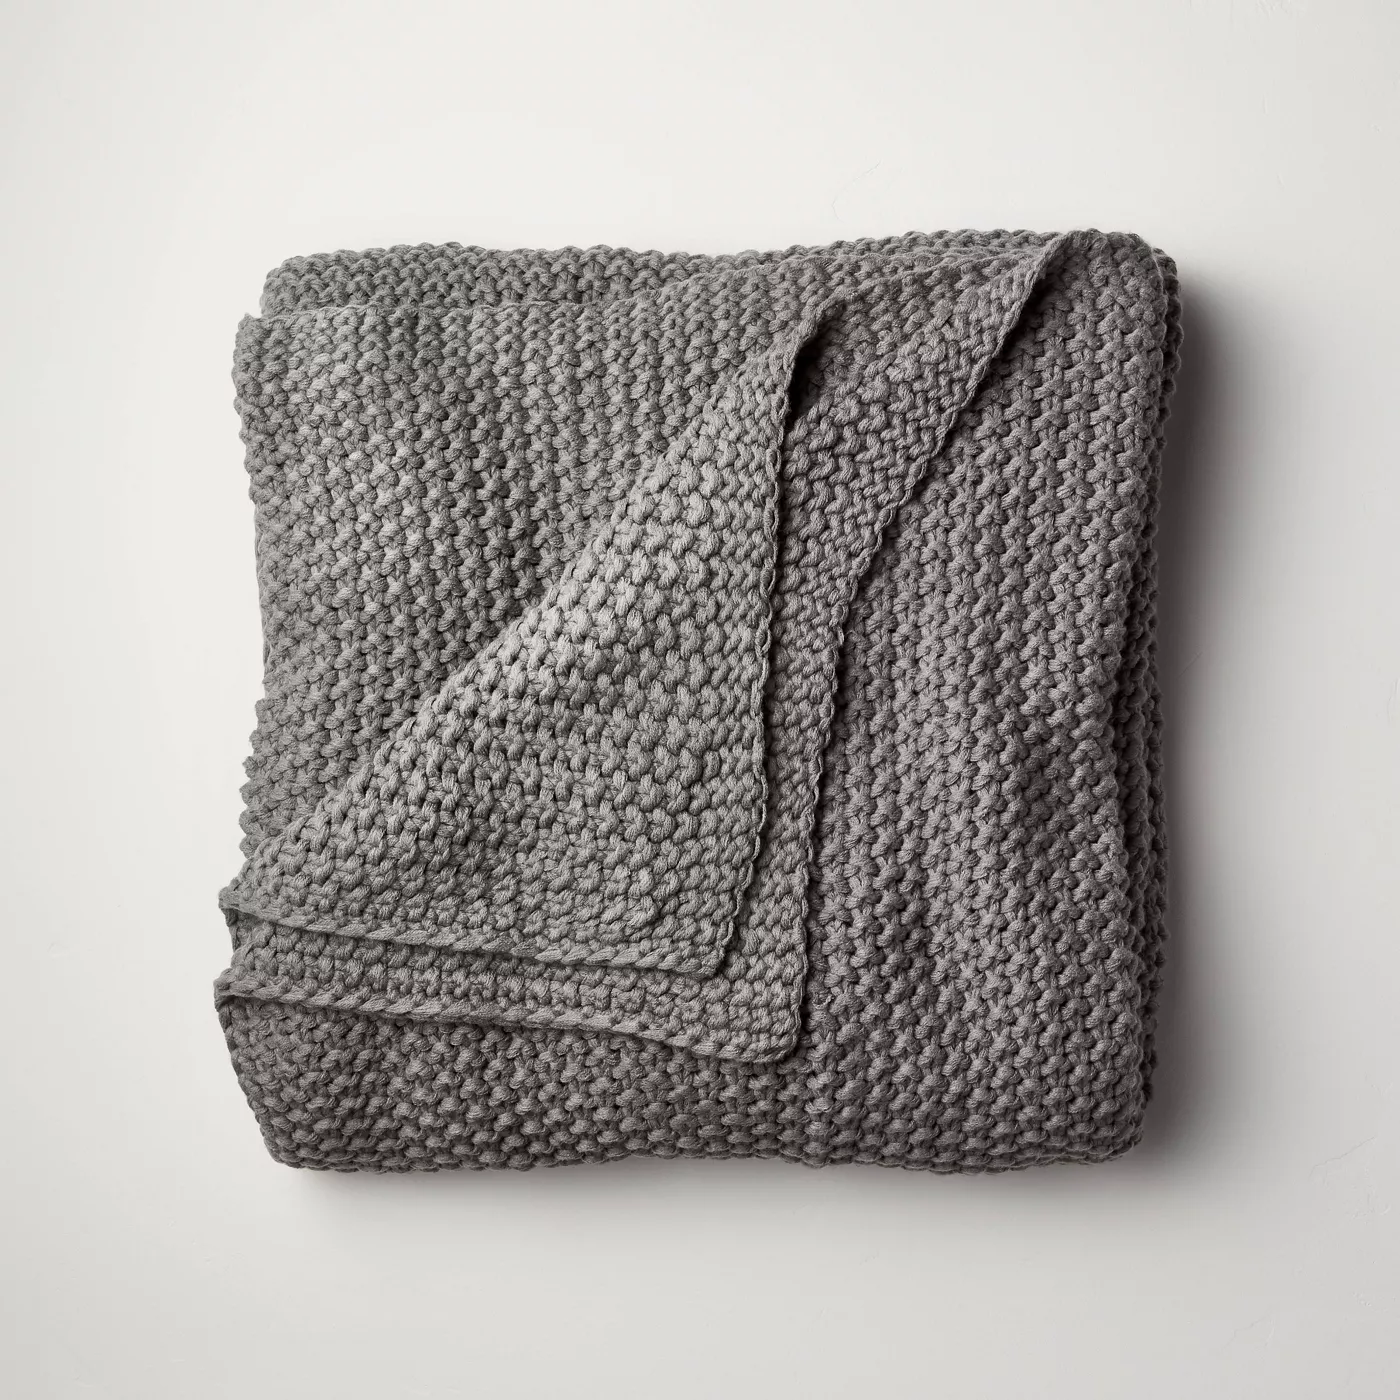 Shop Chunky Knit Bed Blanket - Casaluna™ from Target on Openhaus